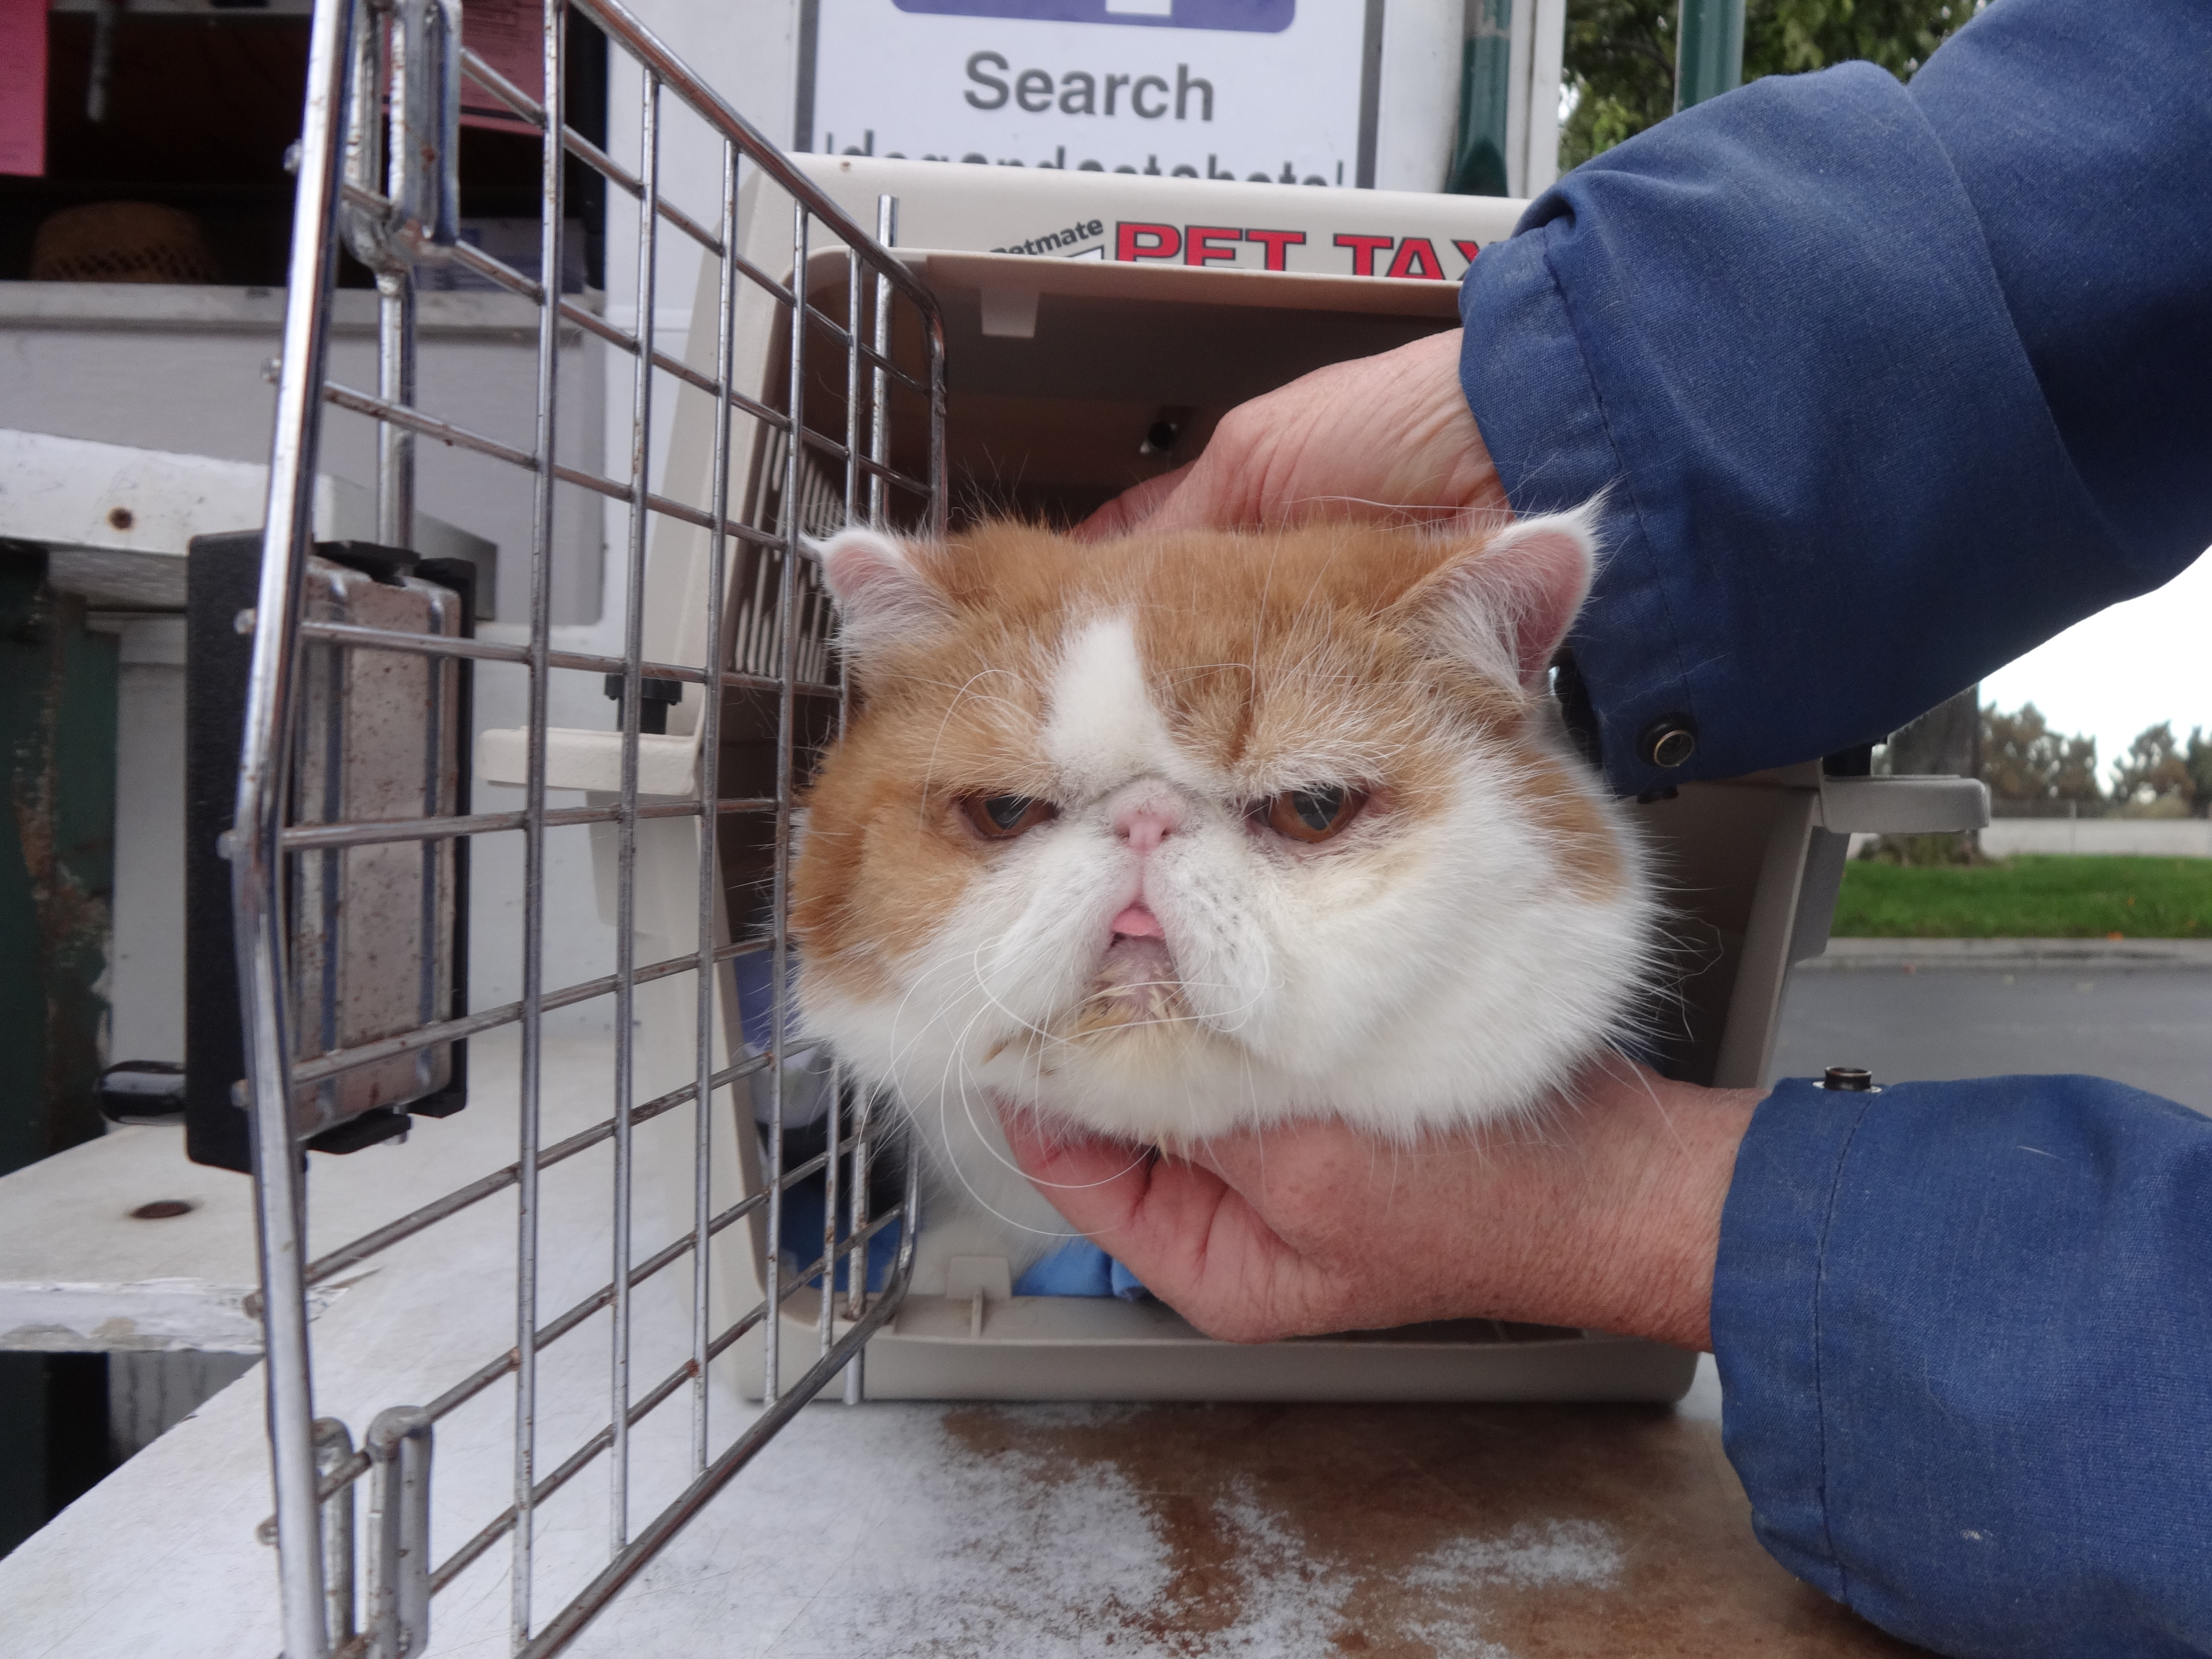 Low Cost Dog and Cat Shots in Northern California Persian Cat gets shots  Vallejo - Low Cost Dog and Cat Shots in Northern California